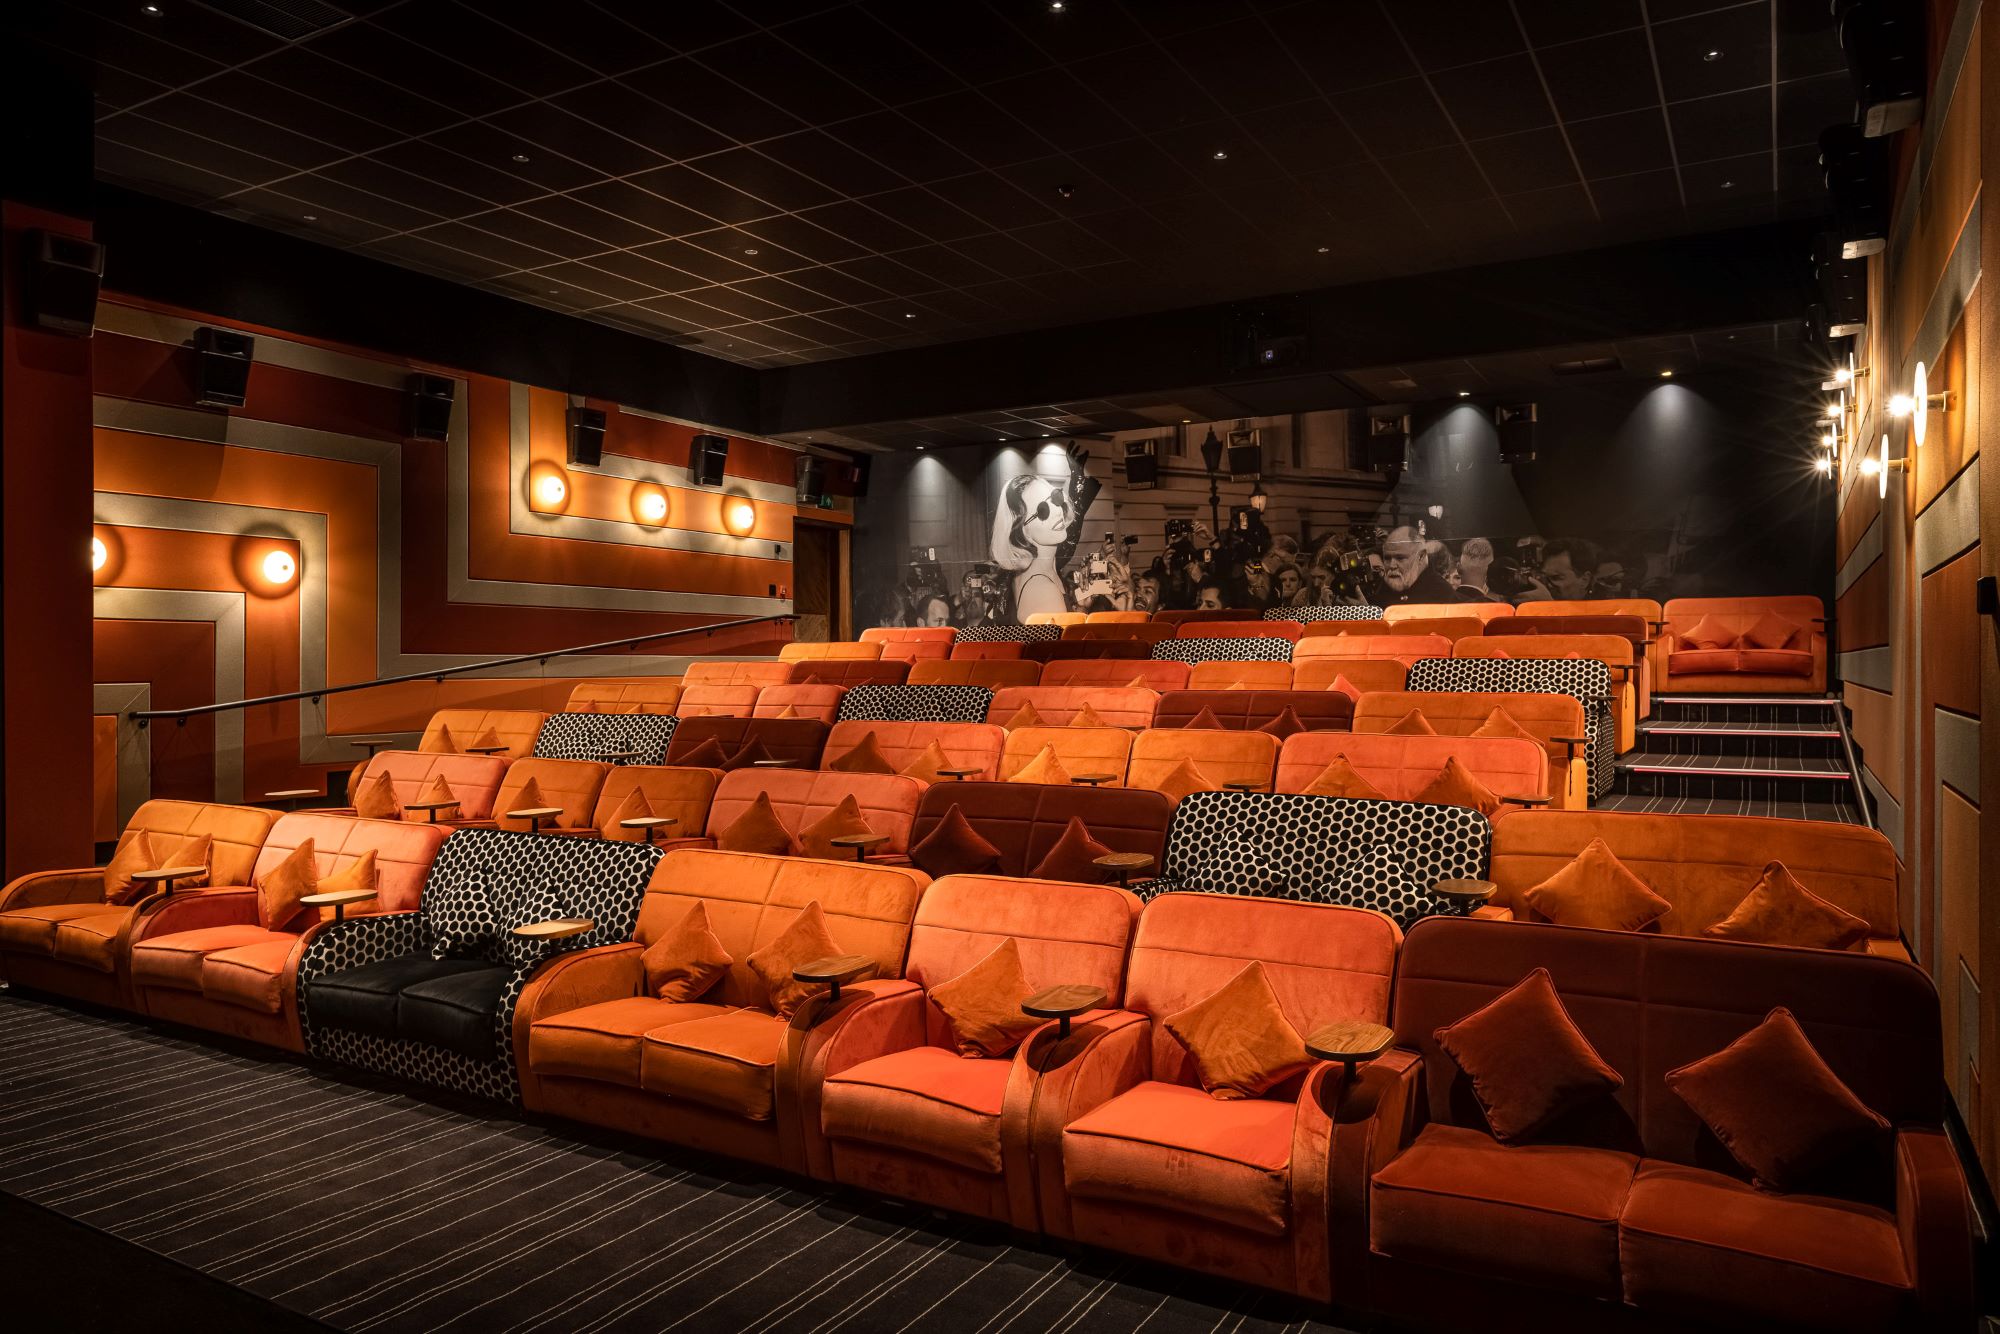 A photo of the interior of an existing Everyman cinema in Egham, Surrey.